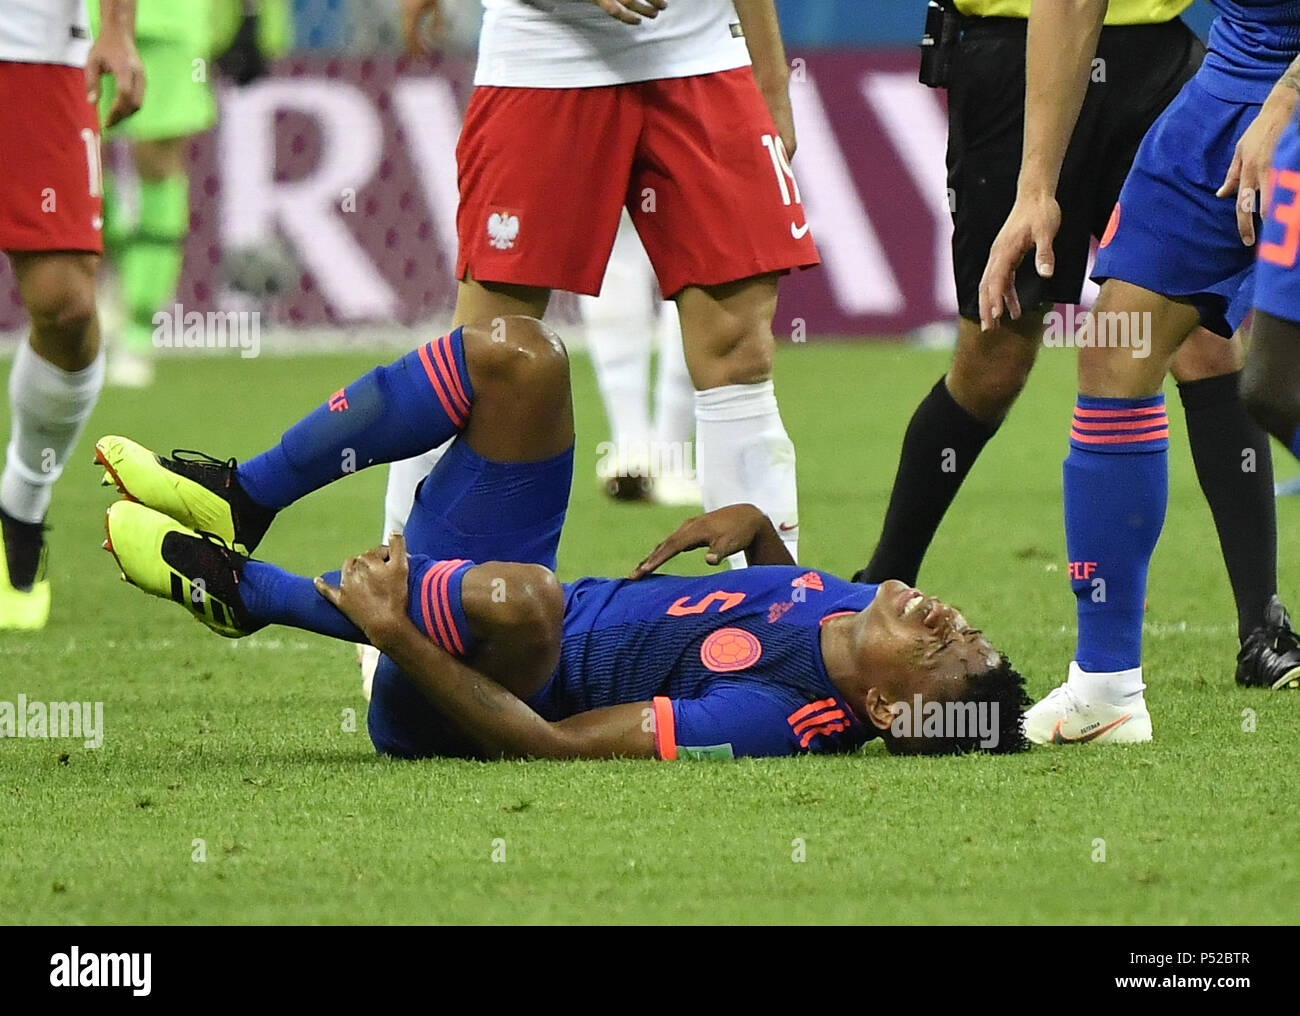 Kazan, Russia. 24th June, 2018. Wilmar Barrios (bottom) of Colombia sustains injury during the 2018 FIFA World Cup Group H match between Poland and Colombia in Kazan, Russia, June 24, 2018. Credit: He Canling/Xinhua/Alamy Live News Stock Photo